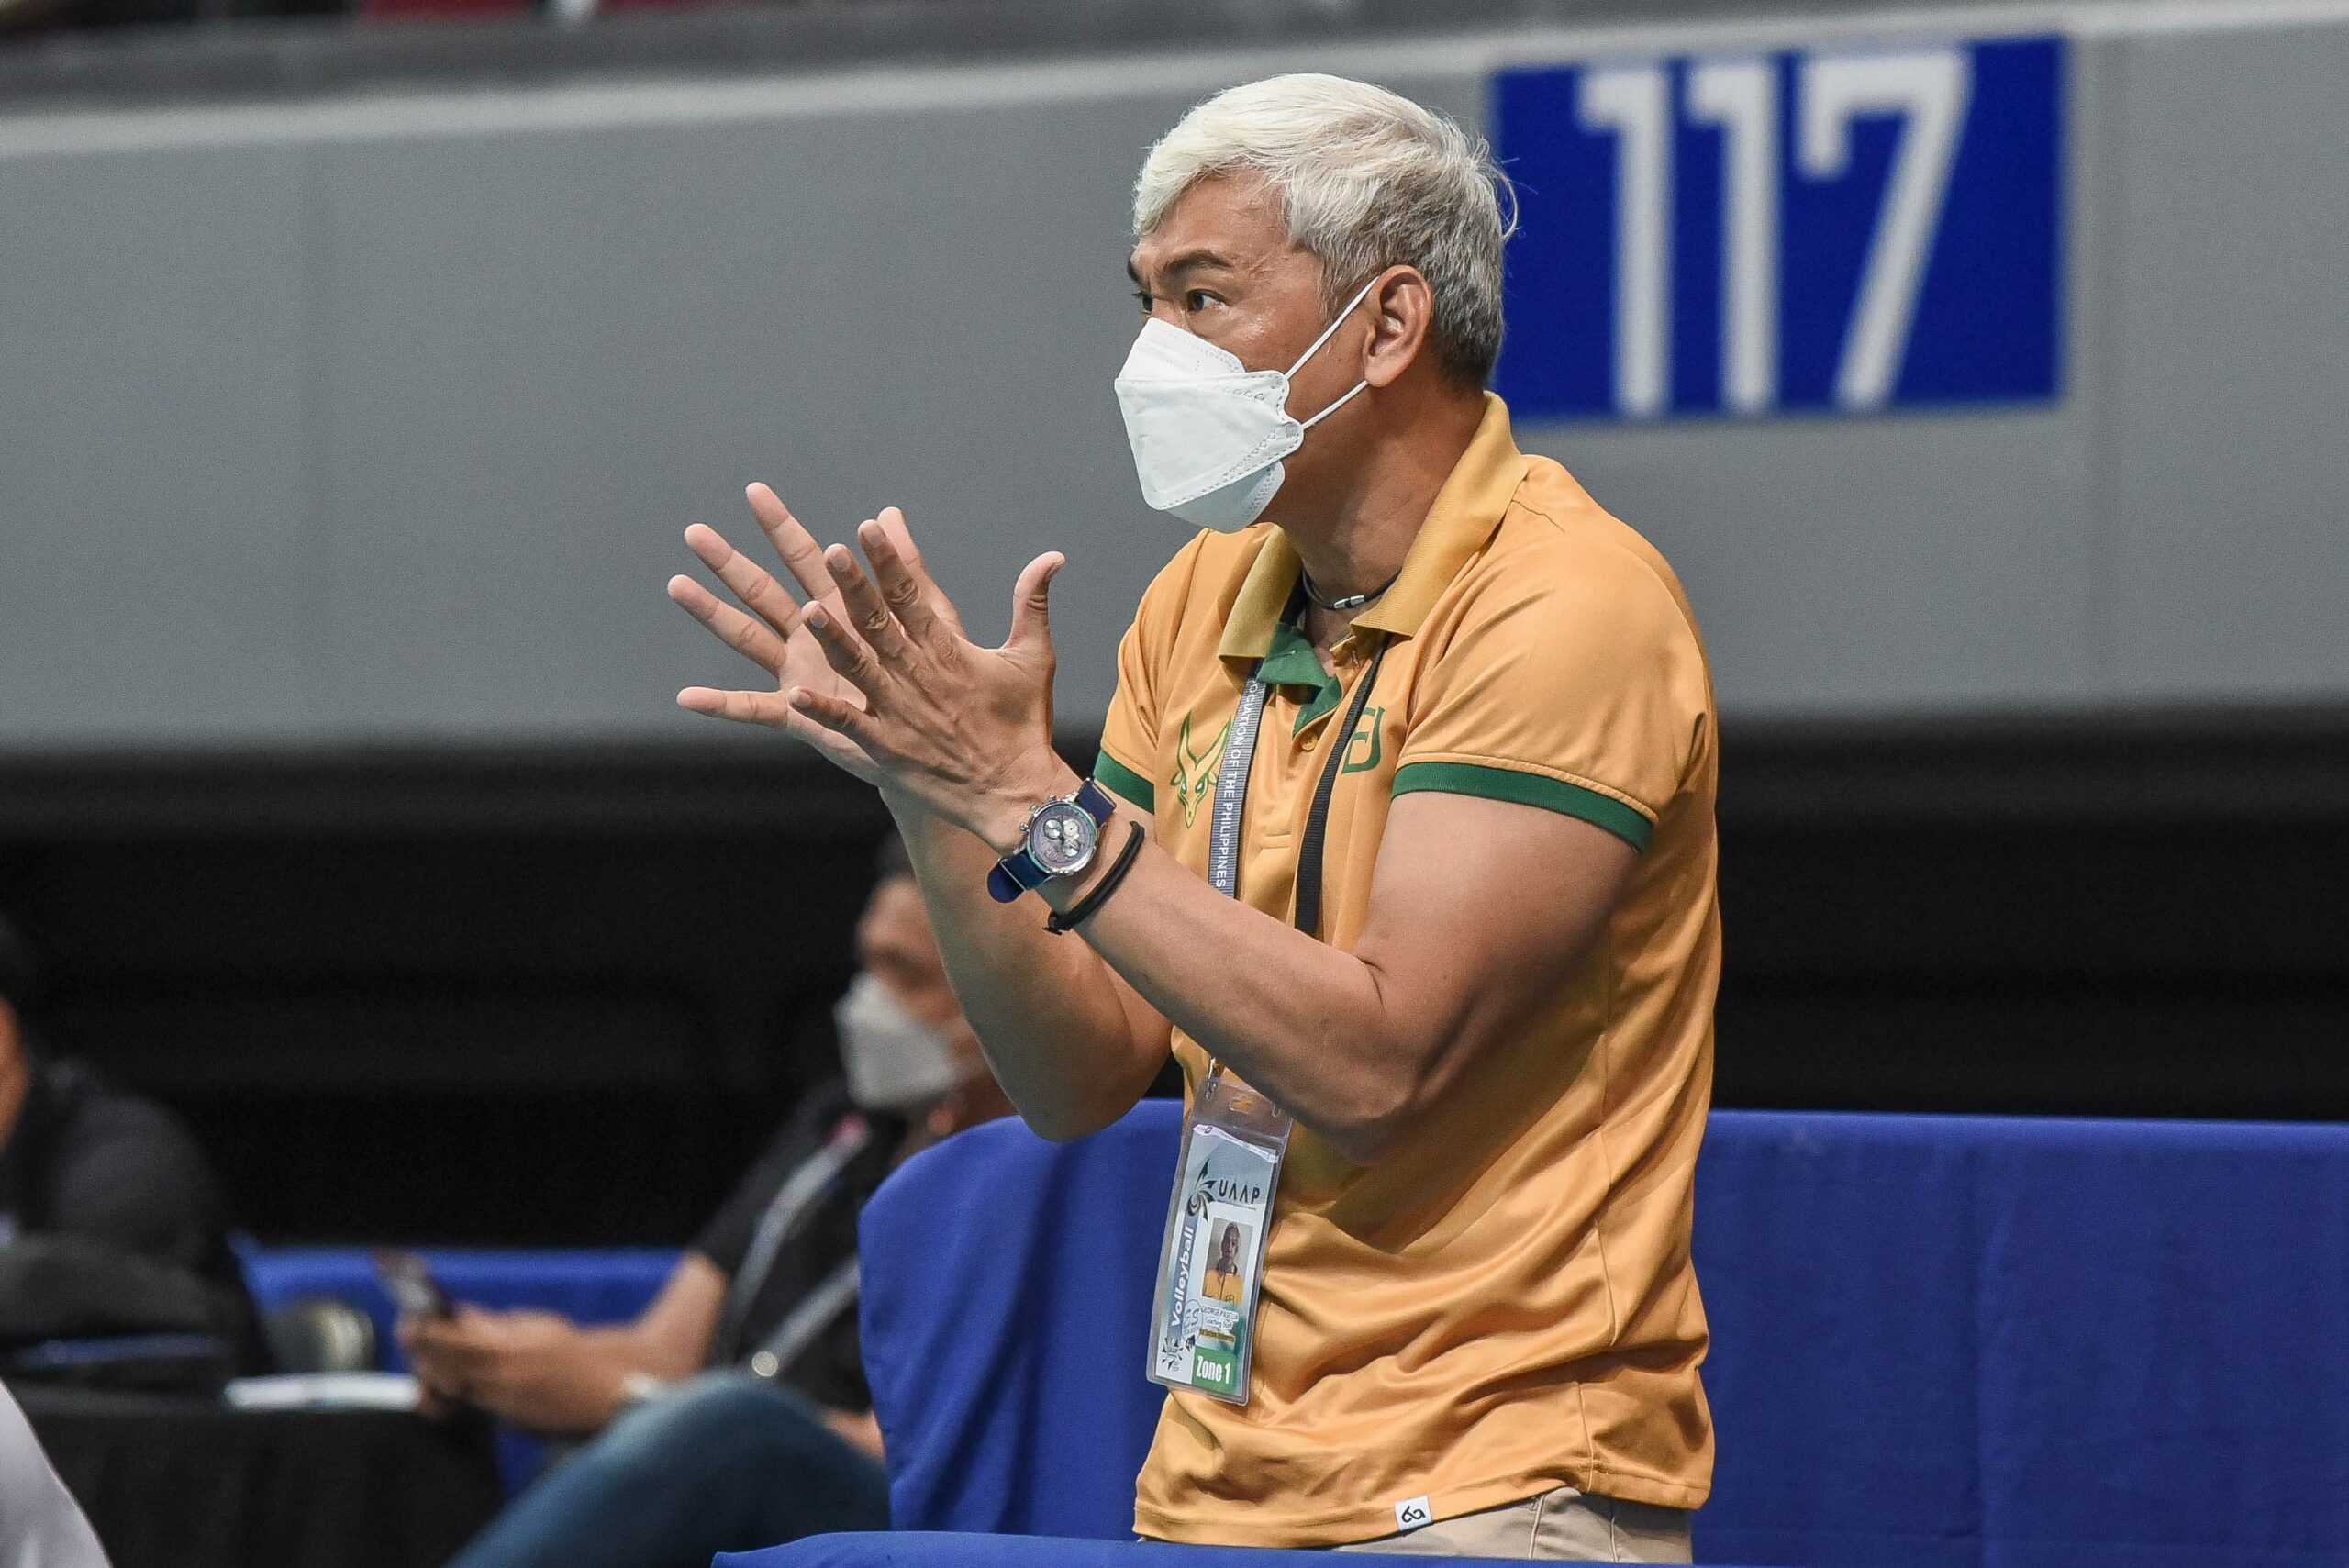 UAAP-84-Womens-Volleyball-FEU-vs-UE-George-Pascua-scaled Ebon hopes FEU continues momentum after nailing first win FEU News UAAP Volleyball  - philippine sports news